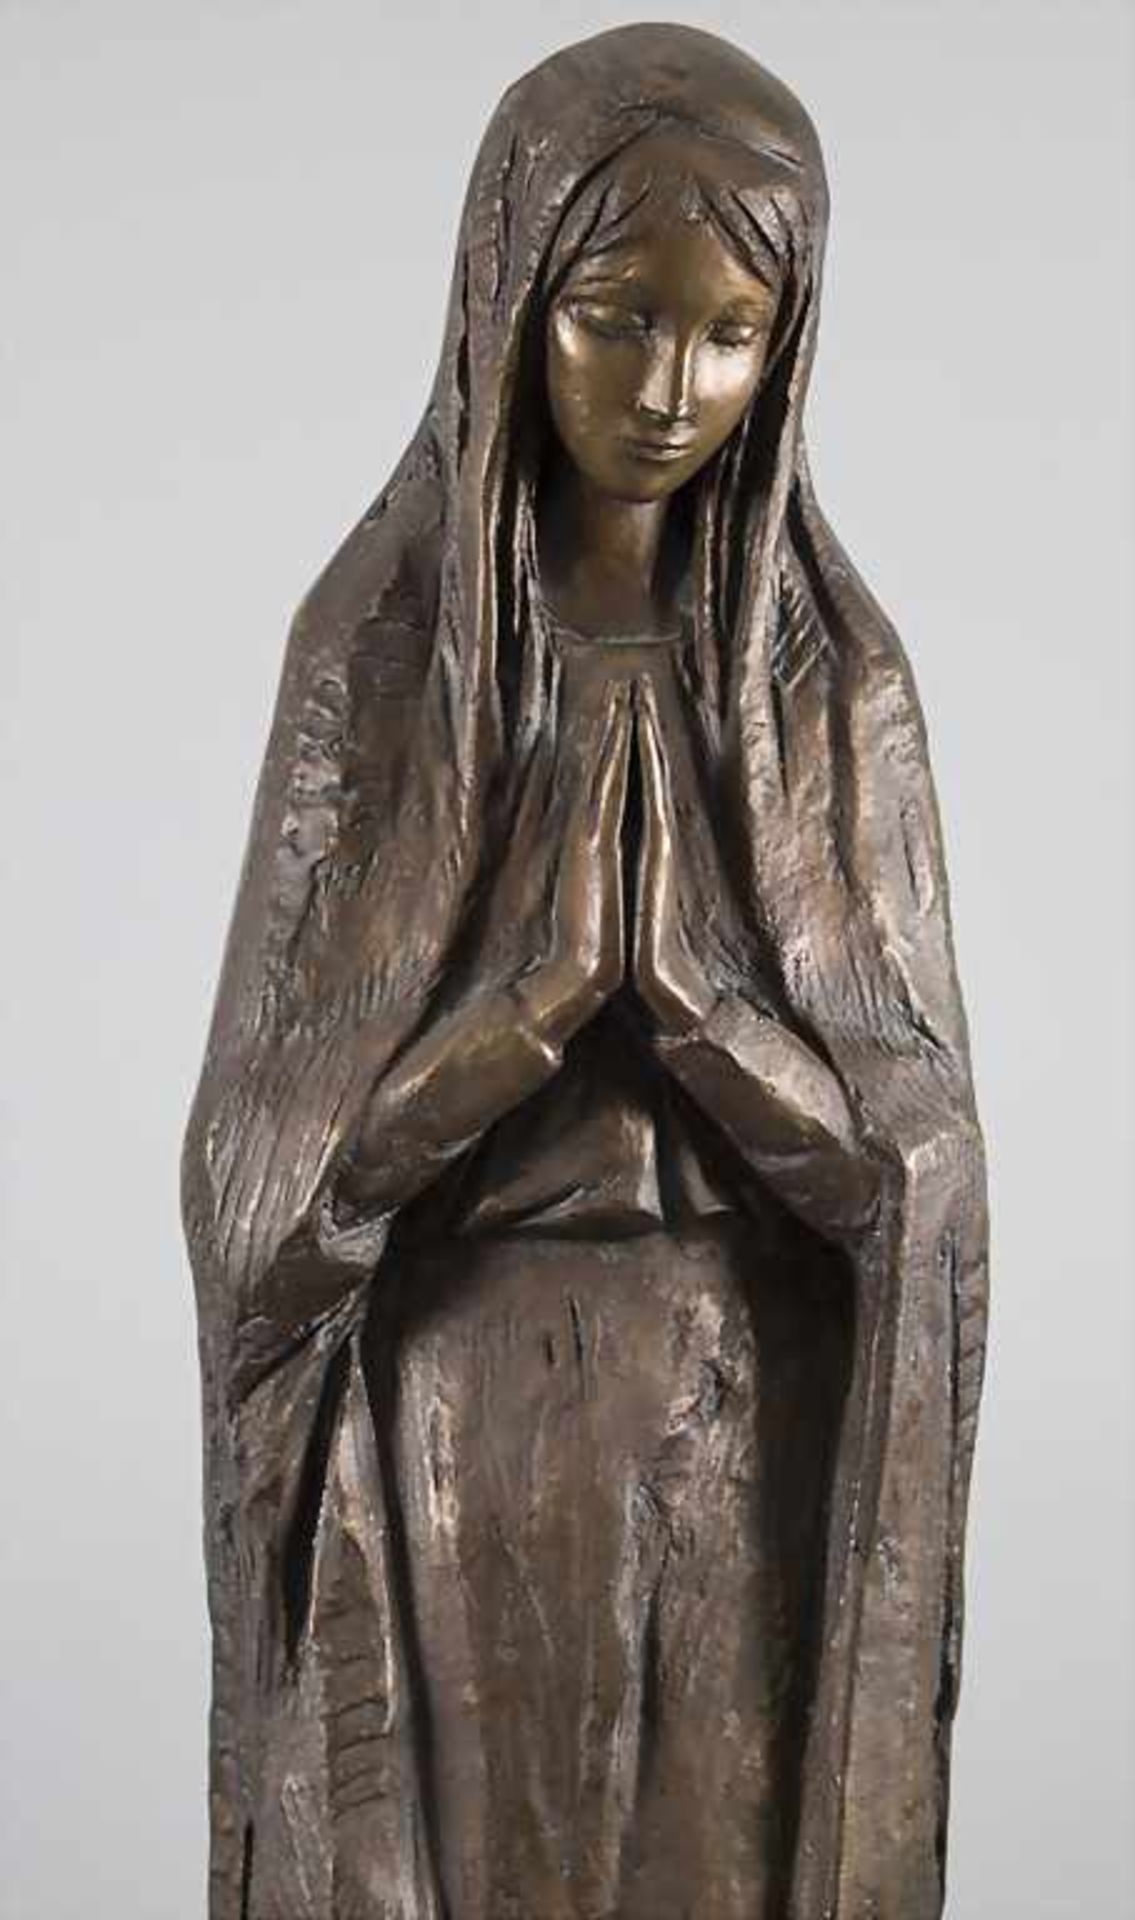 Bronze Skulptur 'Betende Maria' / A bronze sculpture of 'The praying Mary', 20. Jh. - Image 2 of 5